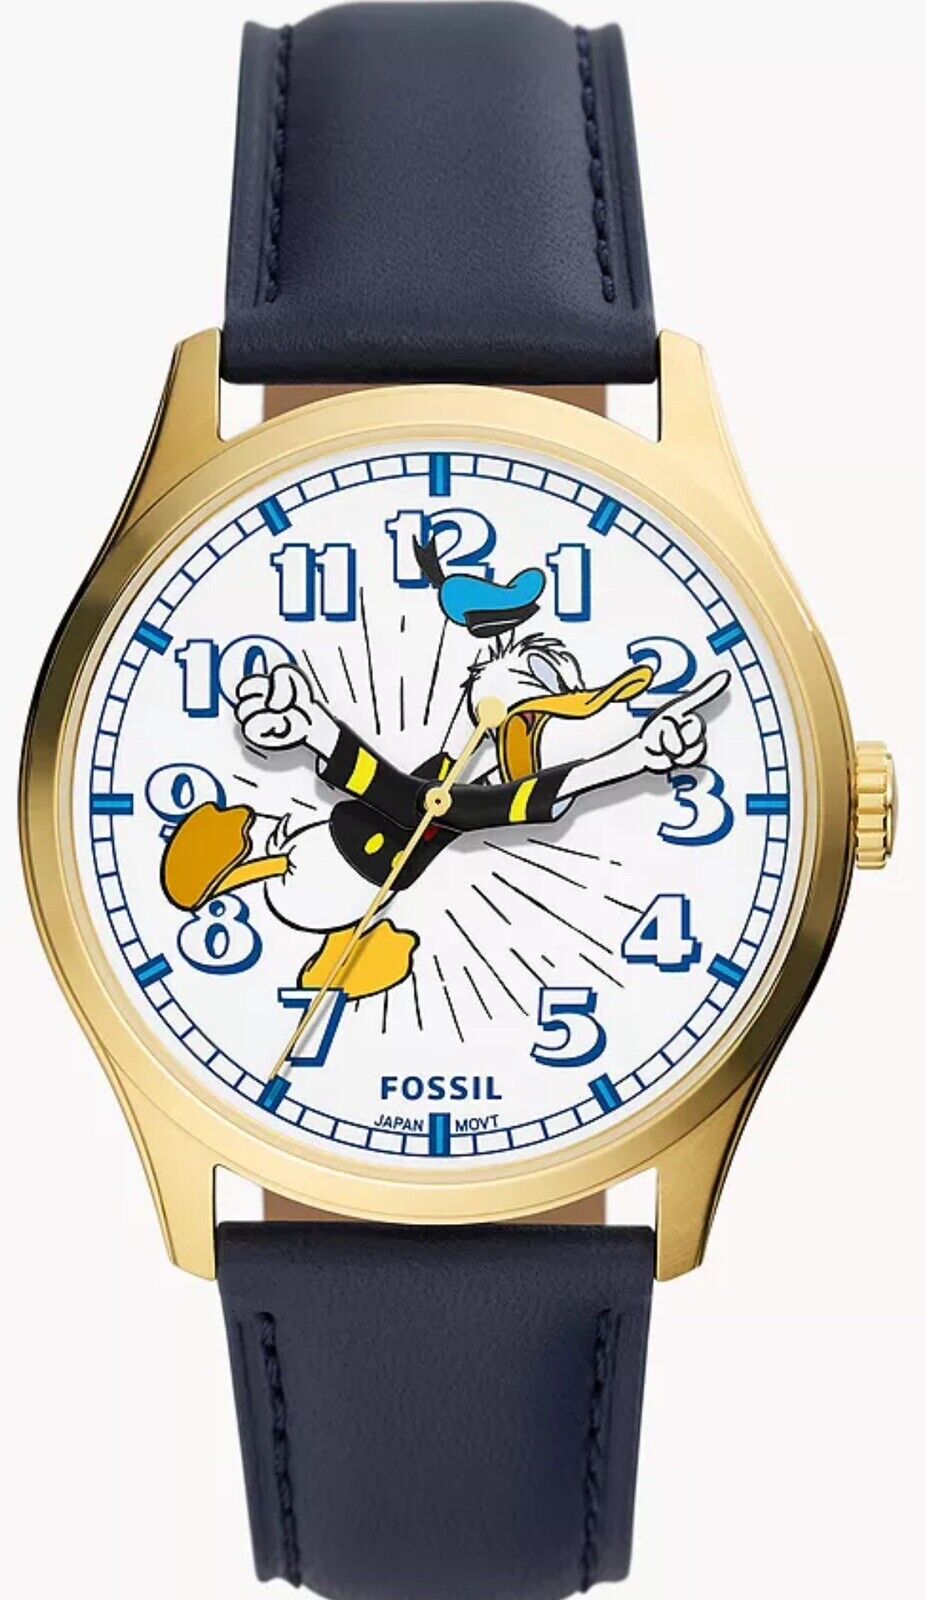 FOSSIL Watch Disney Donald Duck SE1115 Brand New With Tags and Case